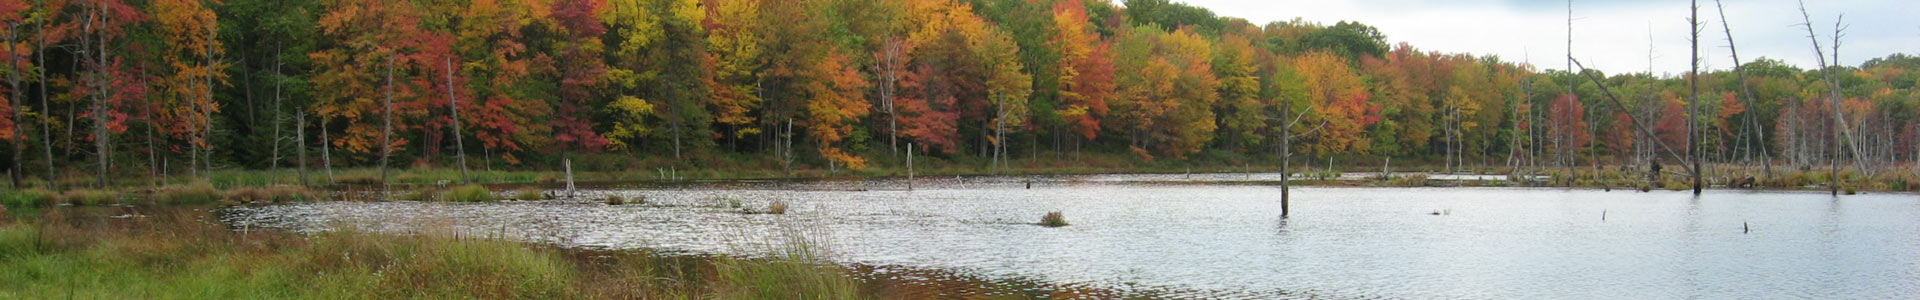 A wetland in fall with colorful trees surrounding the water